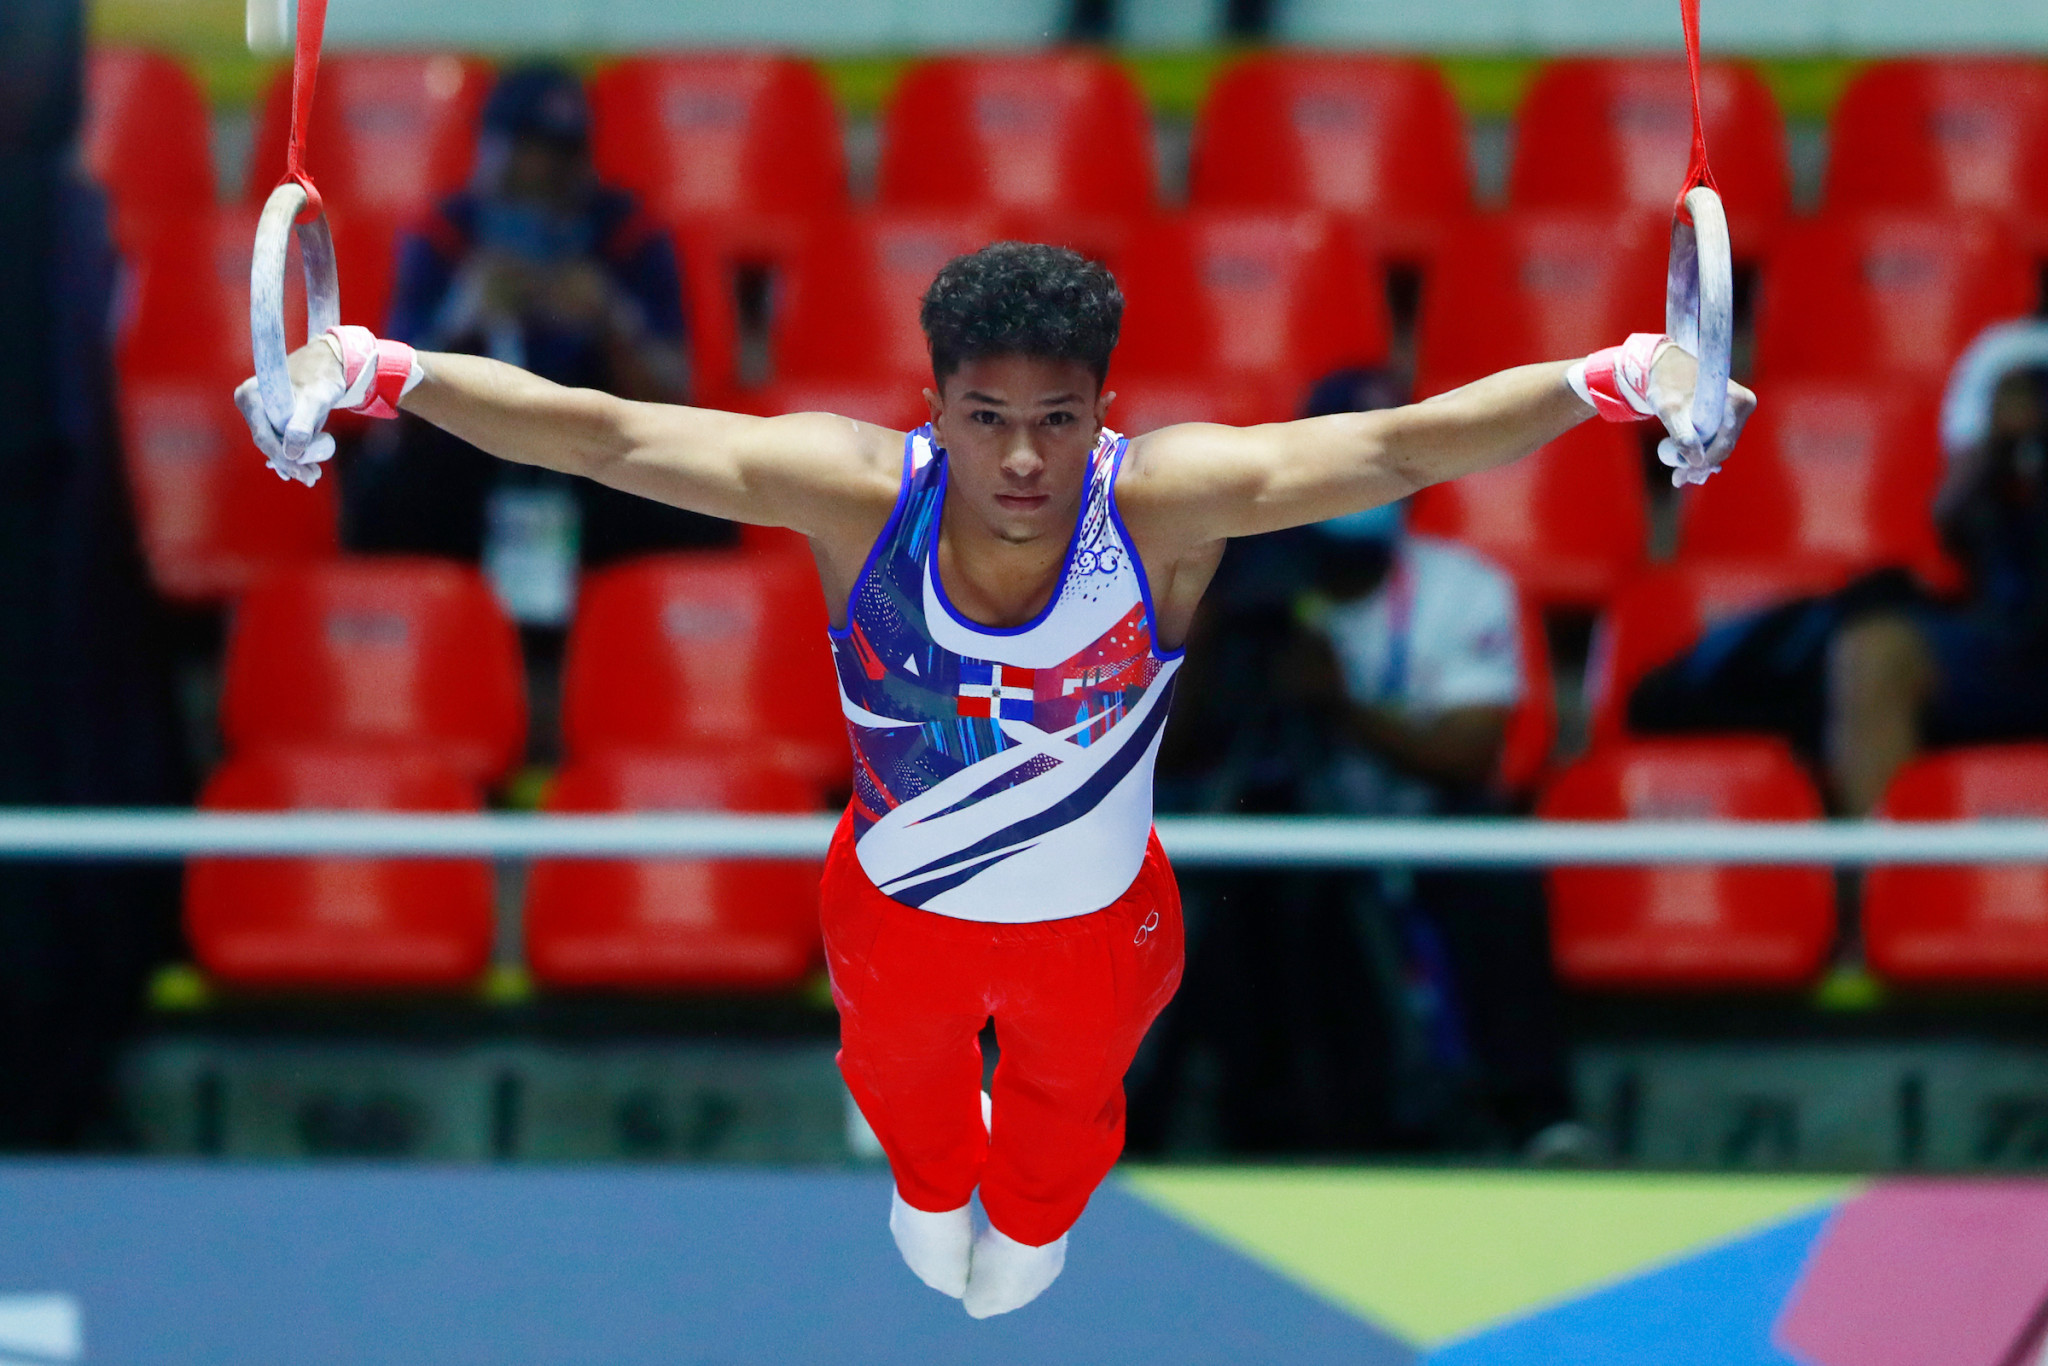 Jabiel De Jesús Polanco Acosta was the only non-United States athlete to win gold in day three of the artistic gymnastics events ©Agencia.Xpress Media